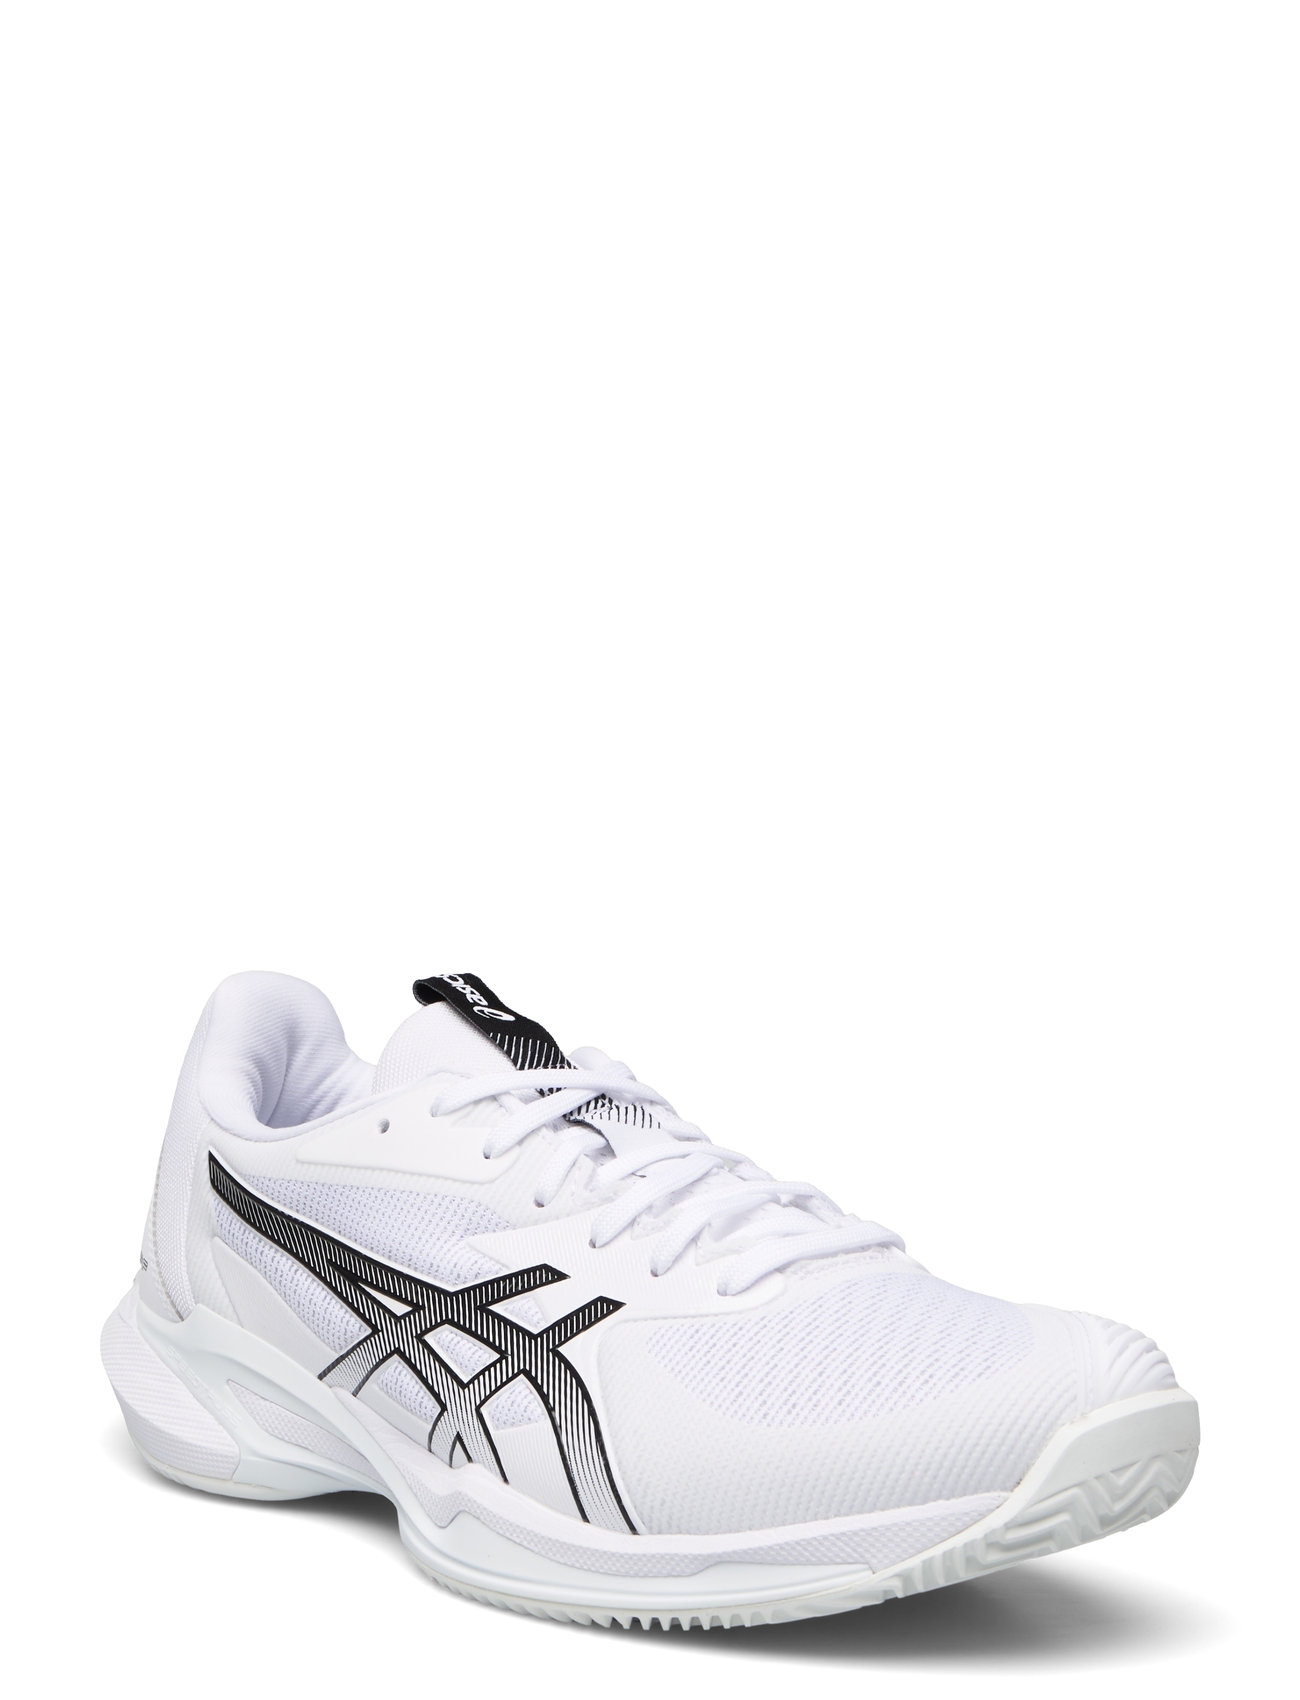 Solution Speed Ff 3 Clay Sport Sport Shoes Racketsports Shoes Tennis Shoes White Asics